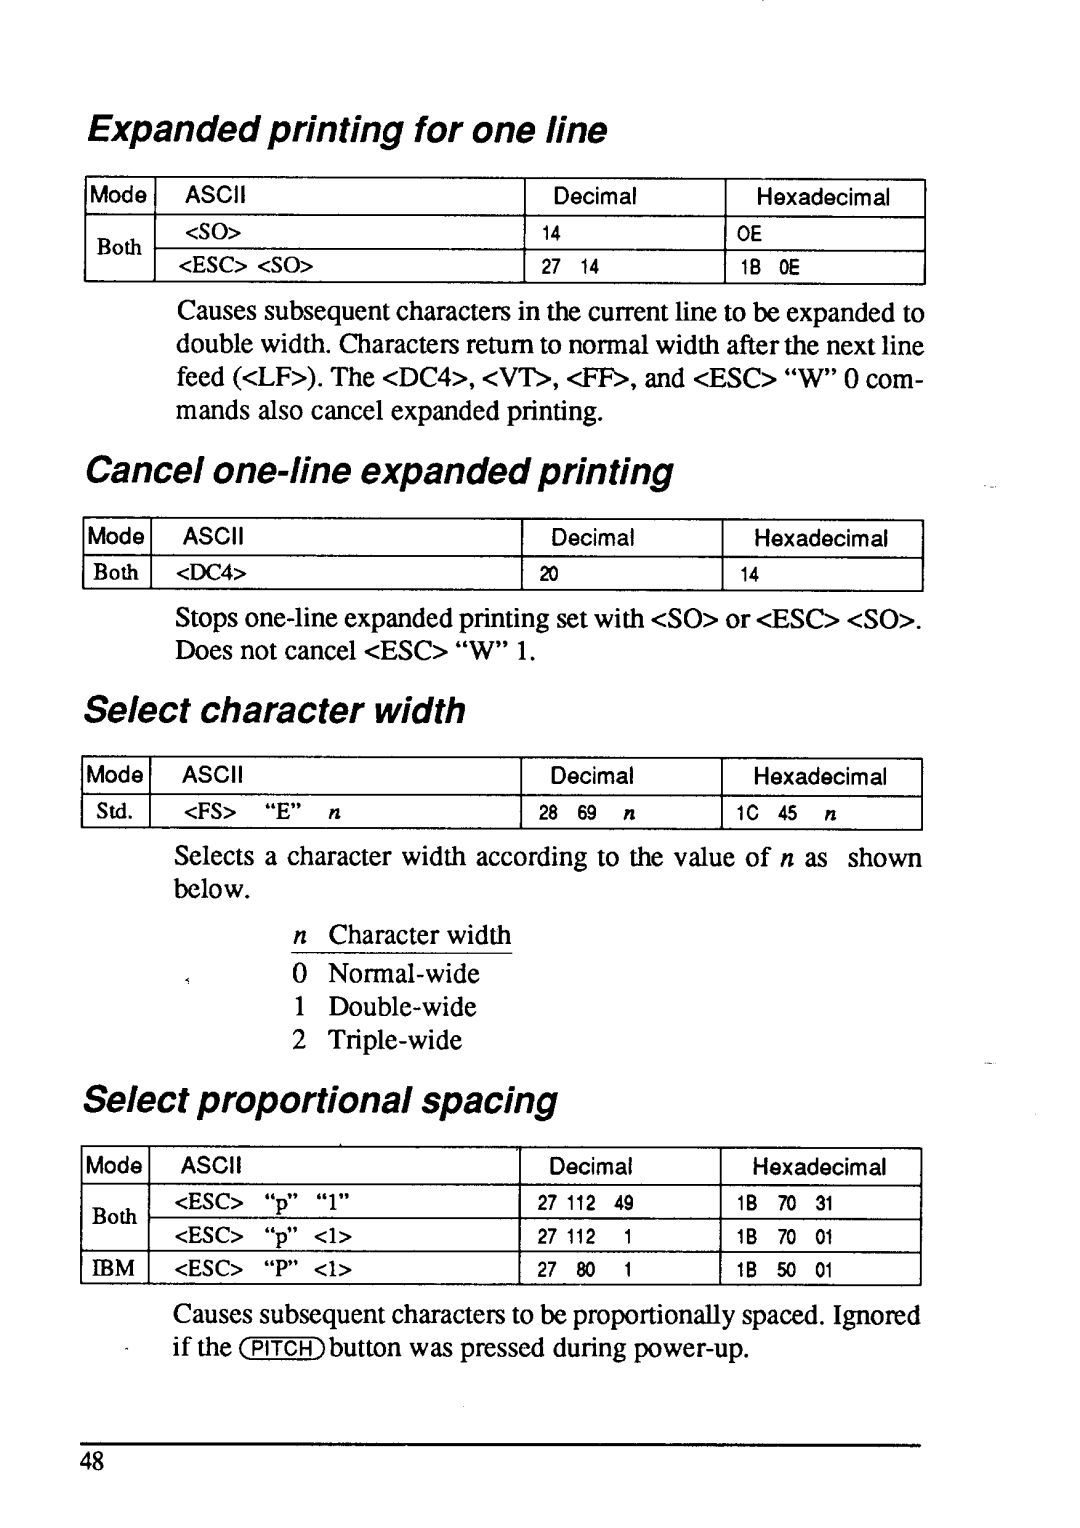 Star Micronics LC24-15 Expanded printing for one line, Cancel one-line expanded printing, Select character width, “p” “1” 